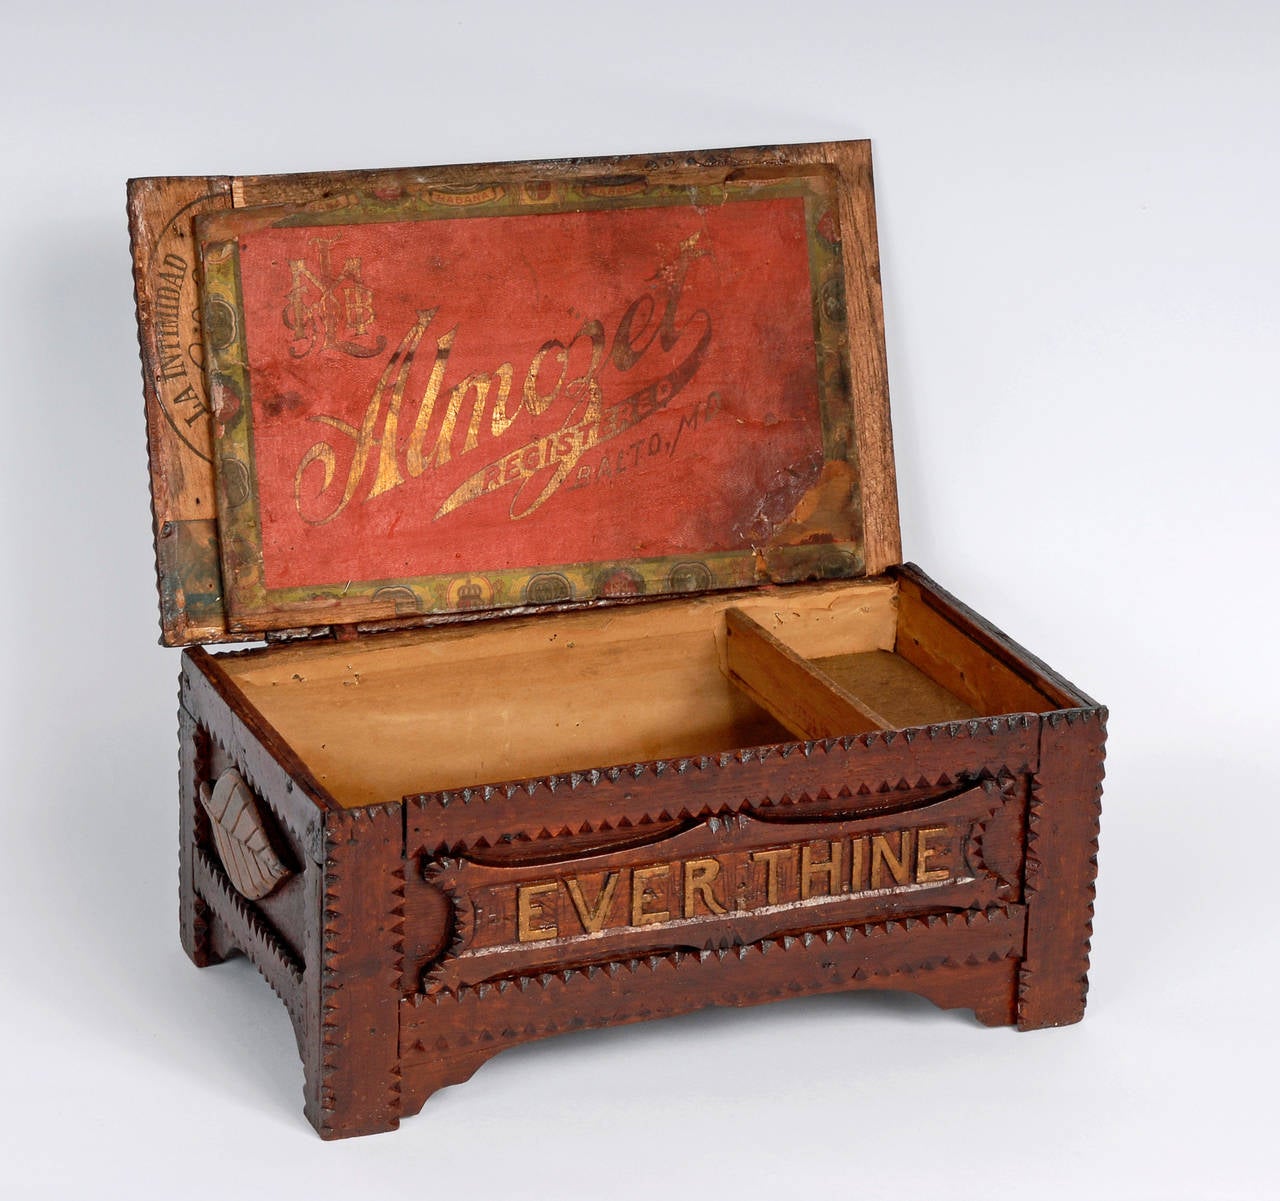 Late 19th Century 'Ever Thine' Inscribed Tramp Art Box with Leaves, Hearts and a Horeshoe